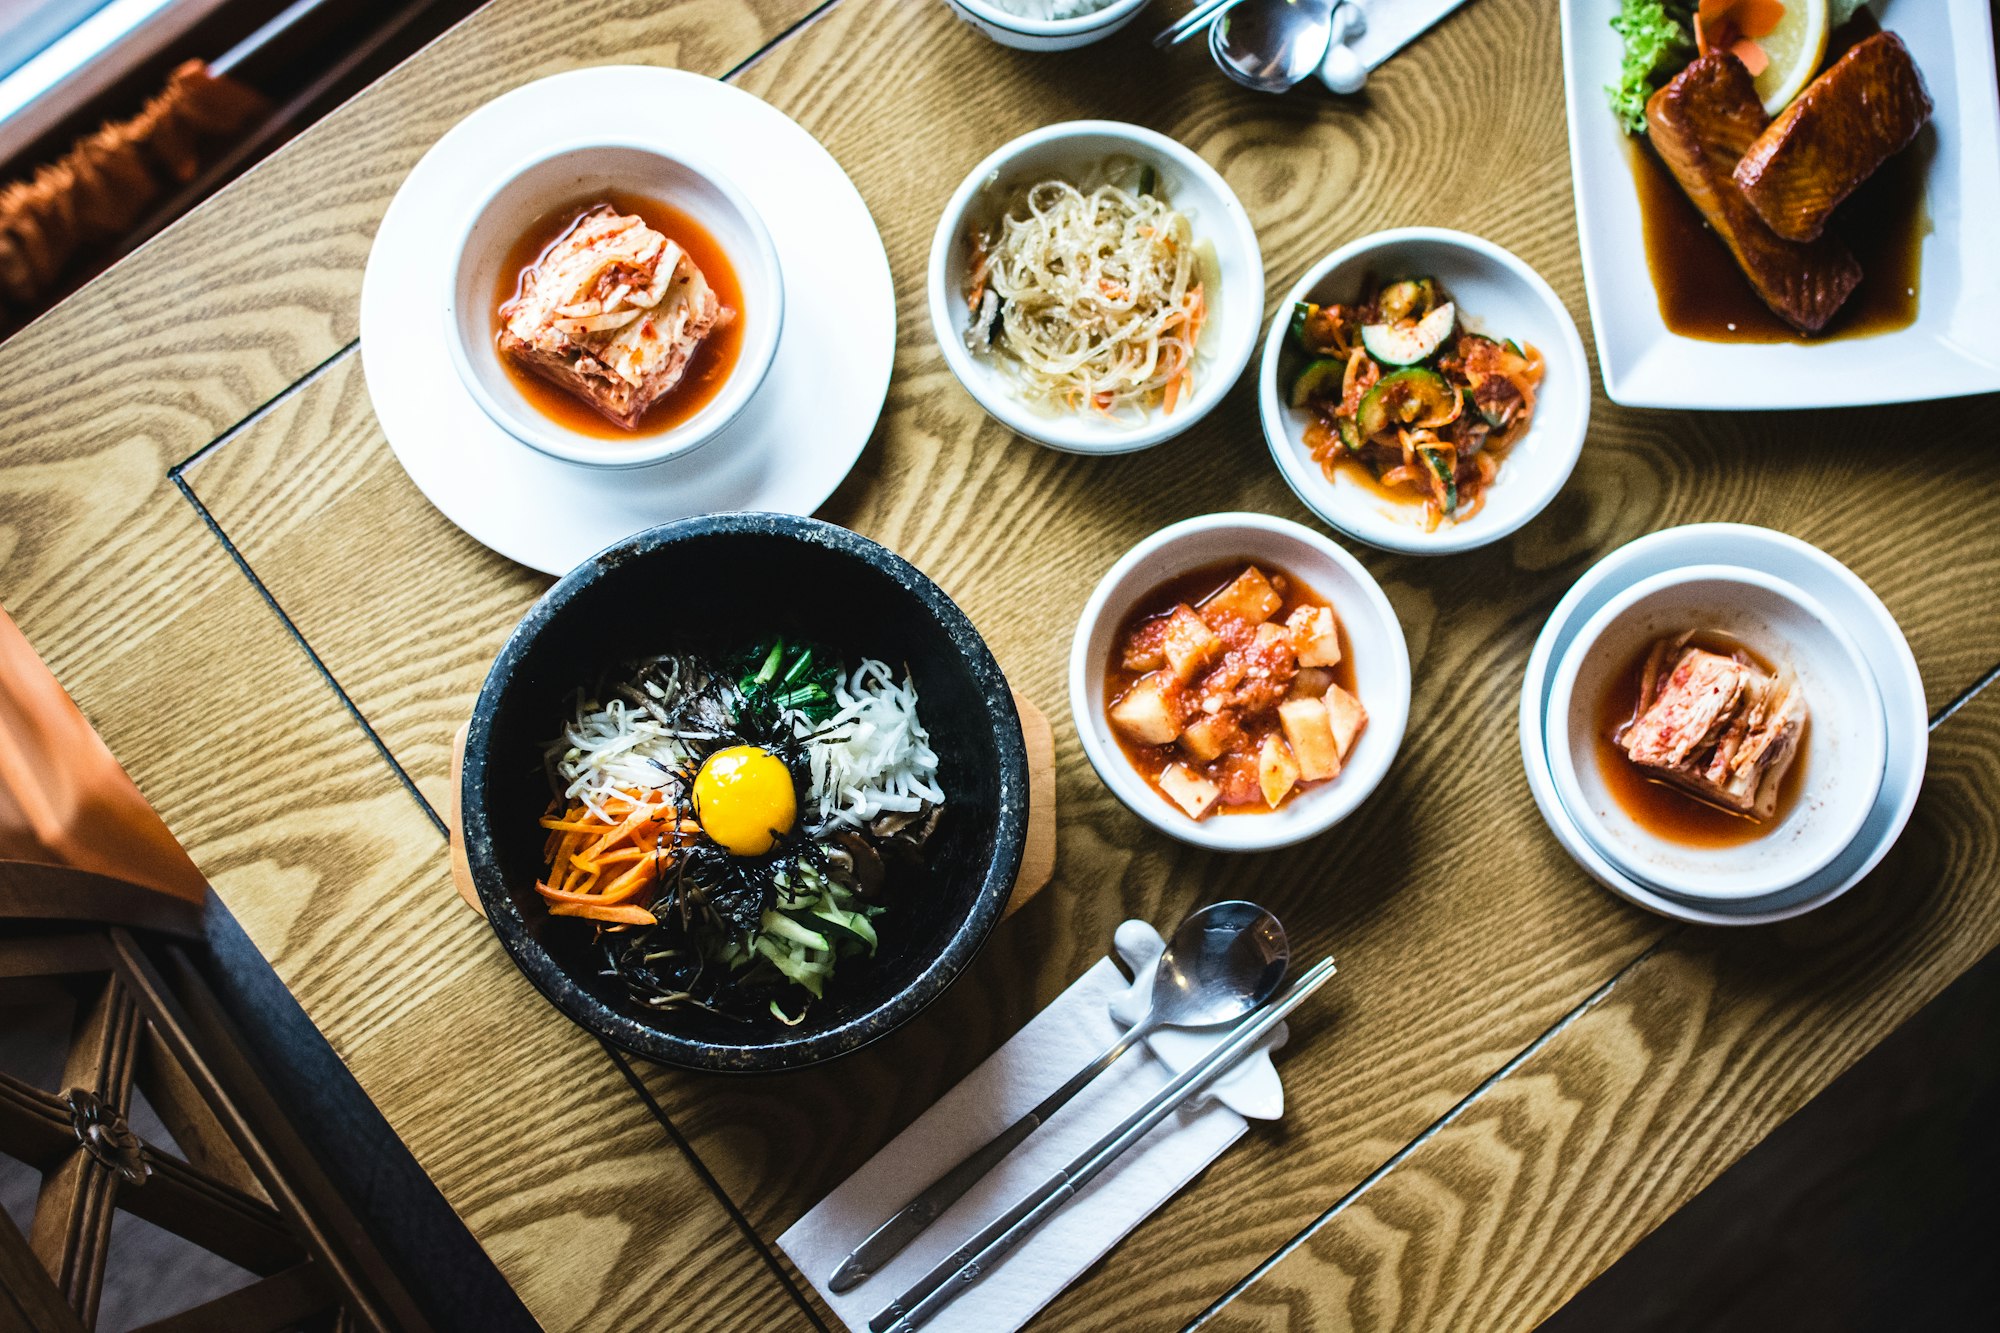 You can also have Your Bibimbap in Vancouver as Well!